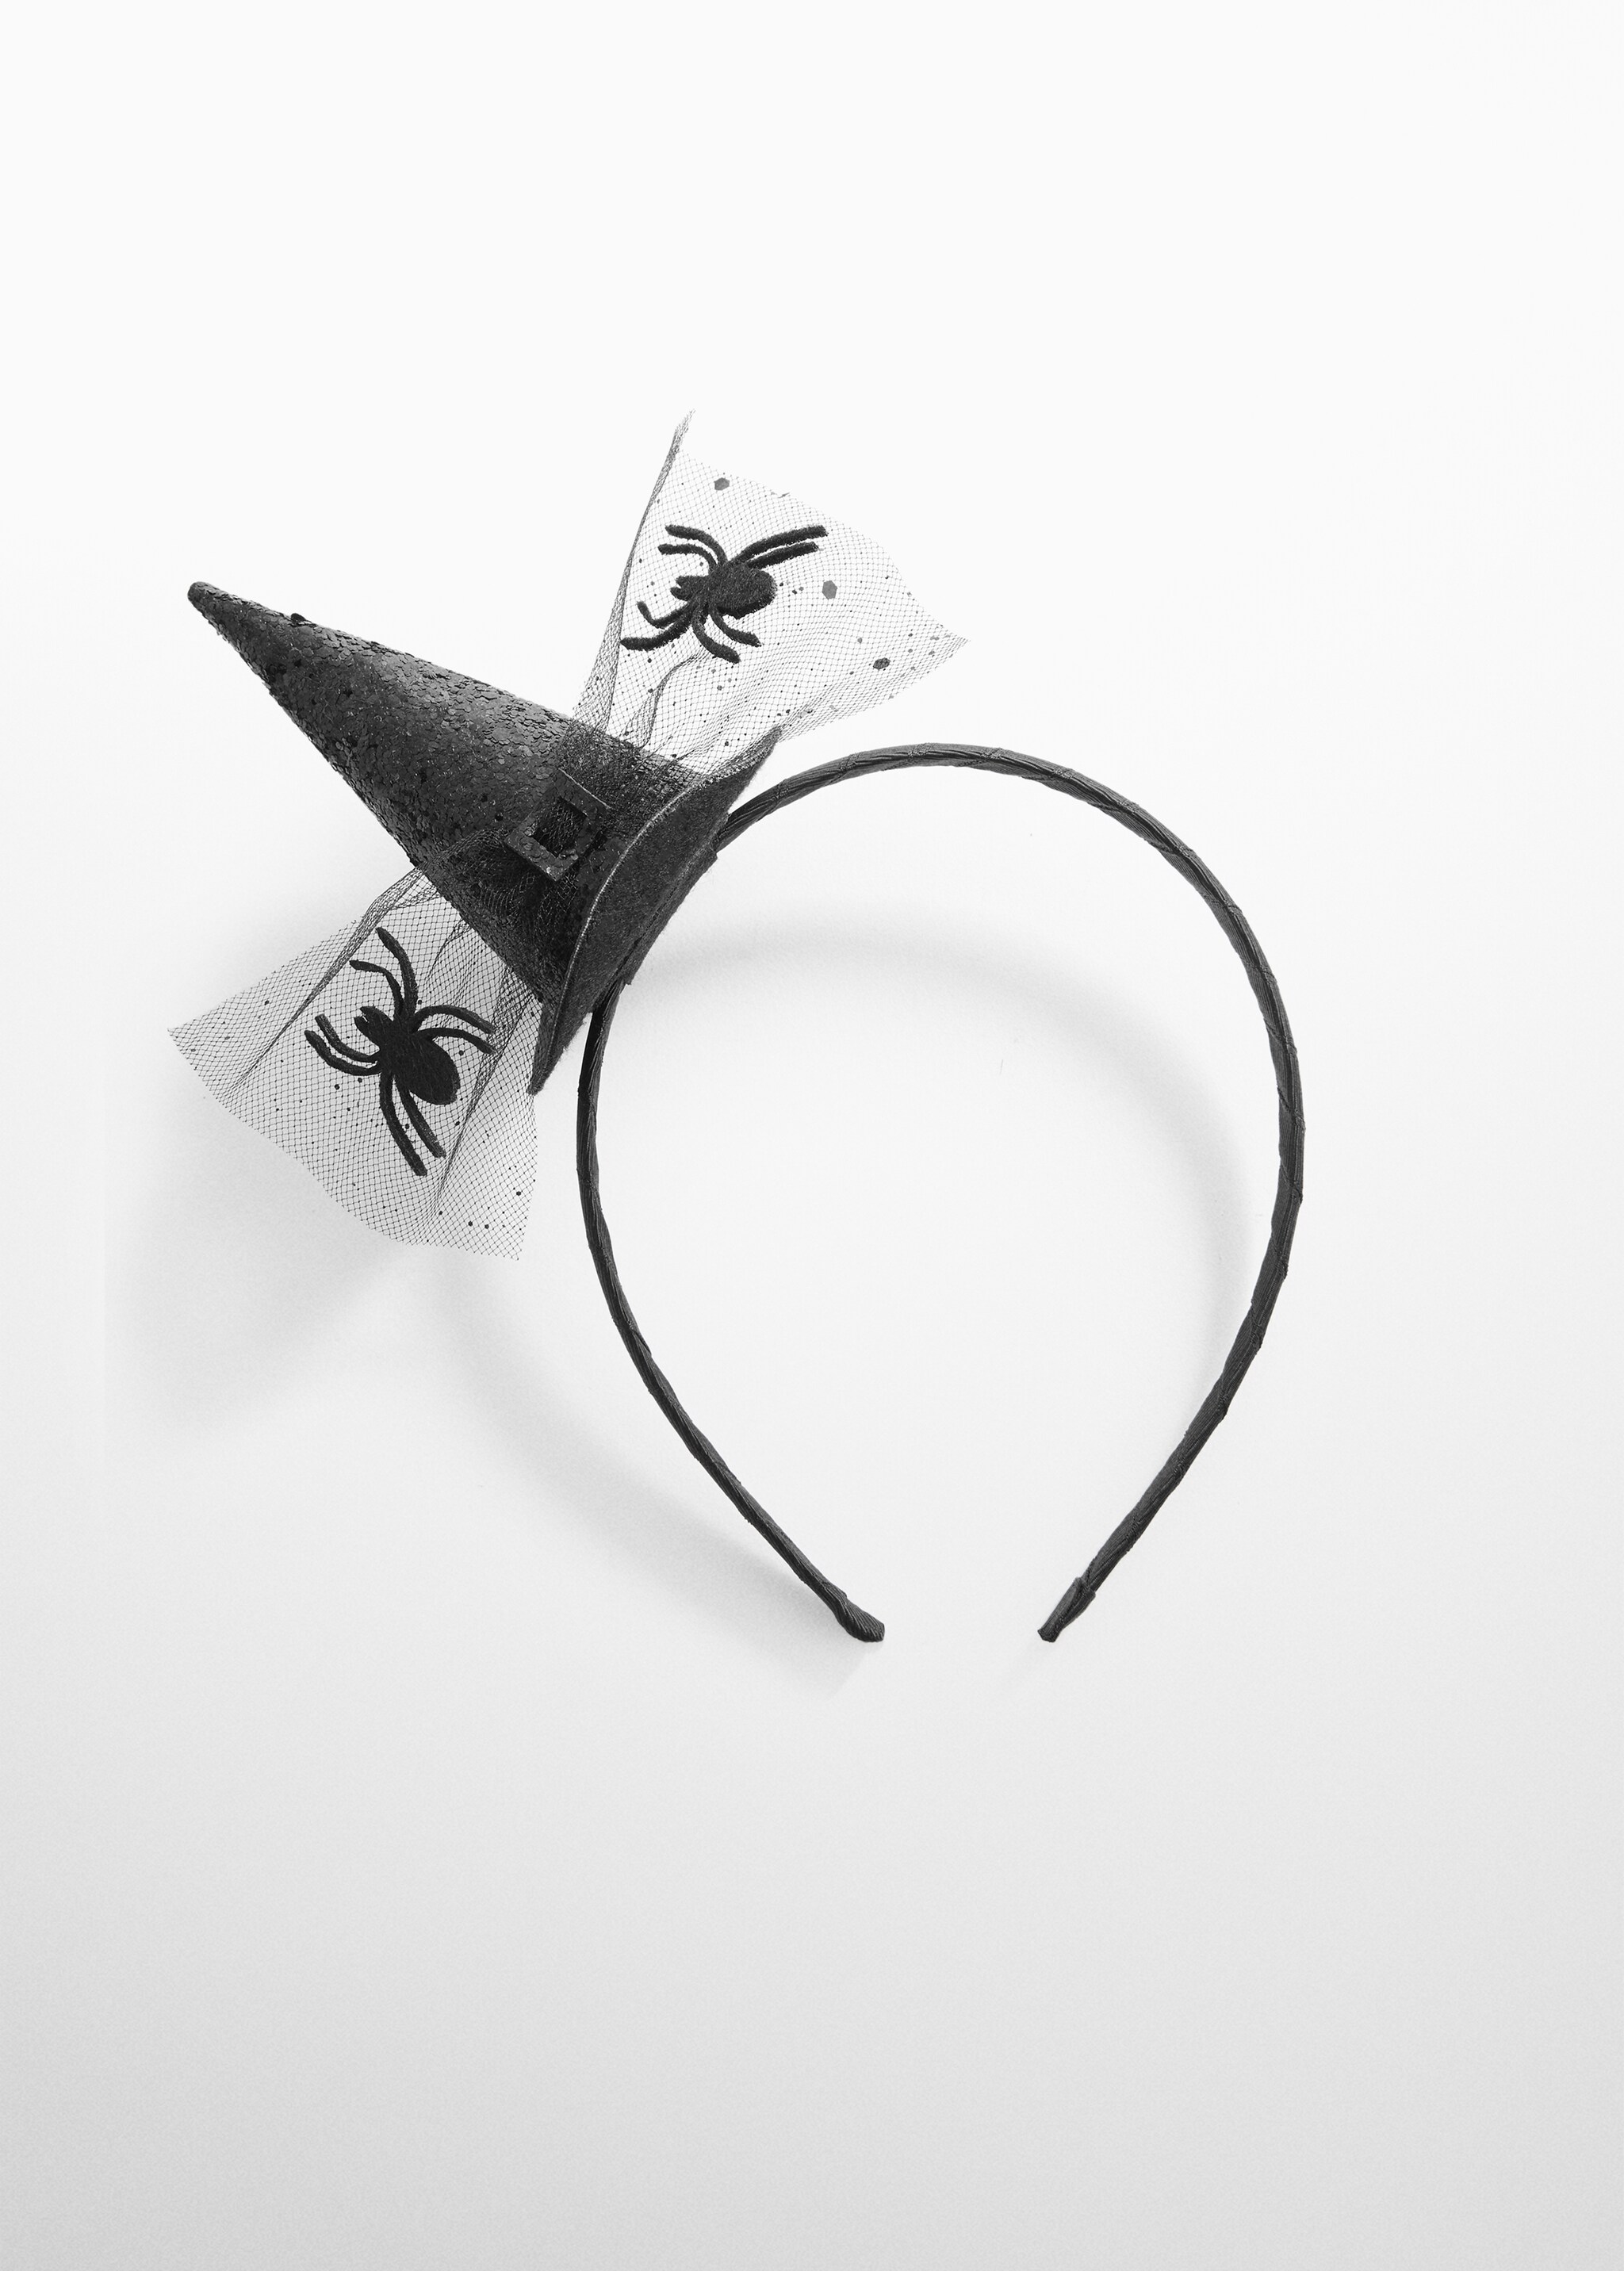 Witch hairband - Article without model